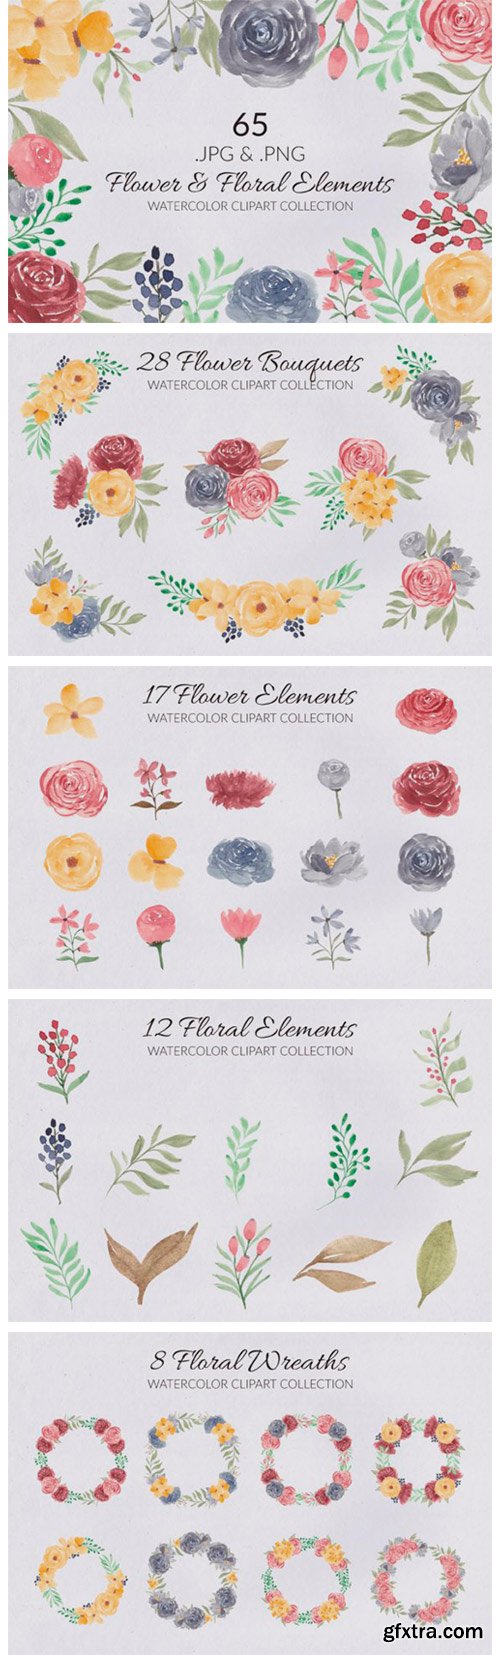 65 Flower and Floral Watercolor Clipart 4178303